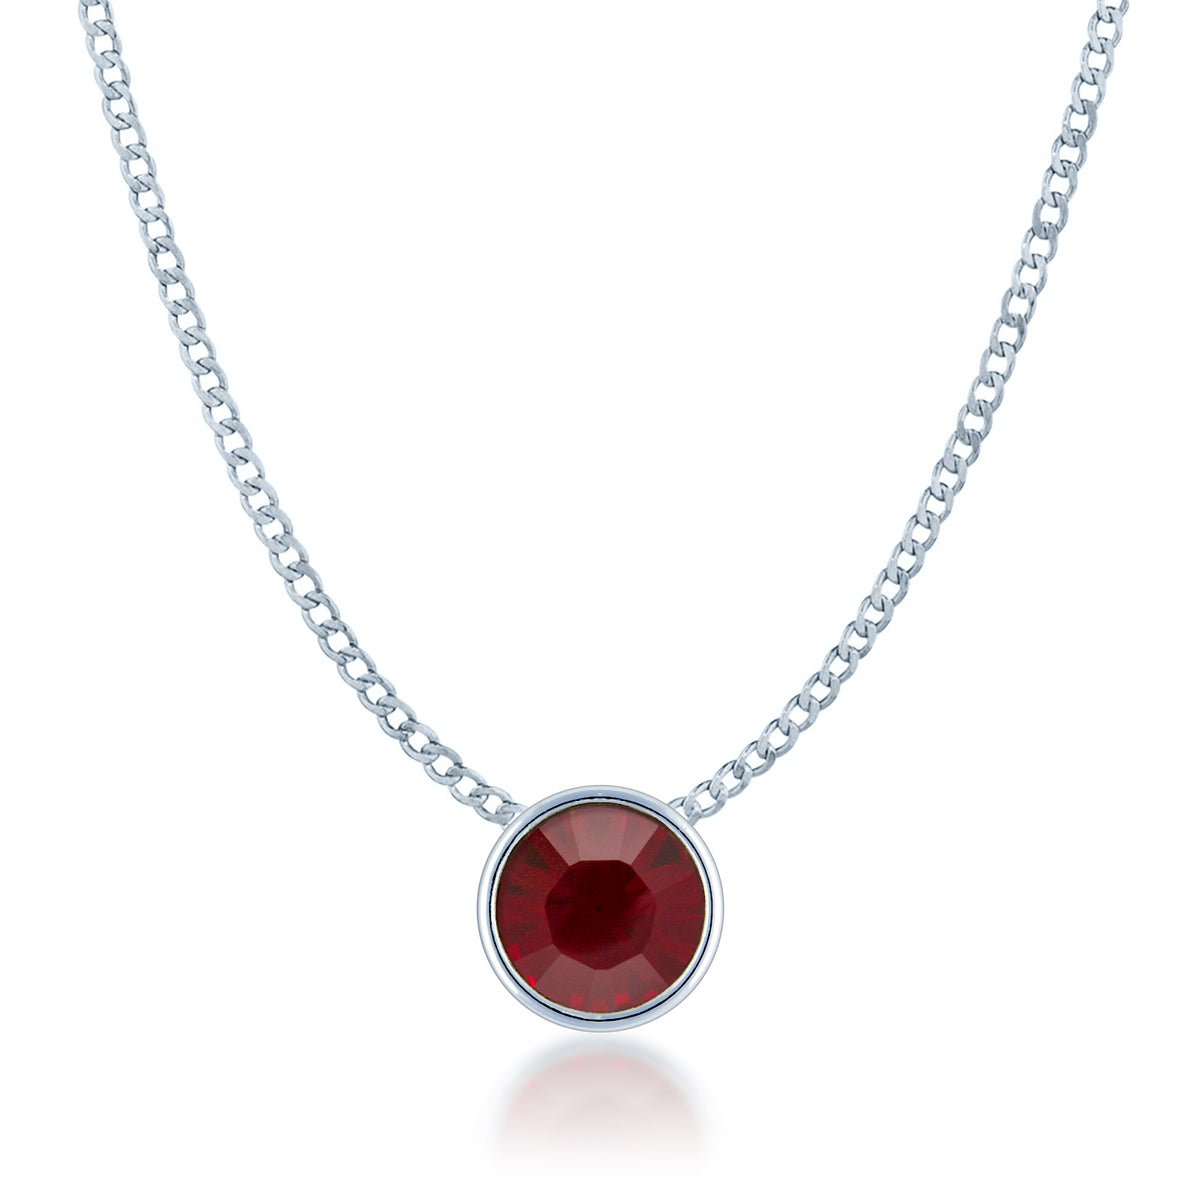 Harley Small Pendant Necklace with Red Siam Round Crystals from Swarovski Silver Toned Rhodium Plated - Ed Heart